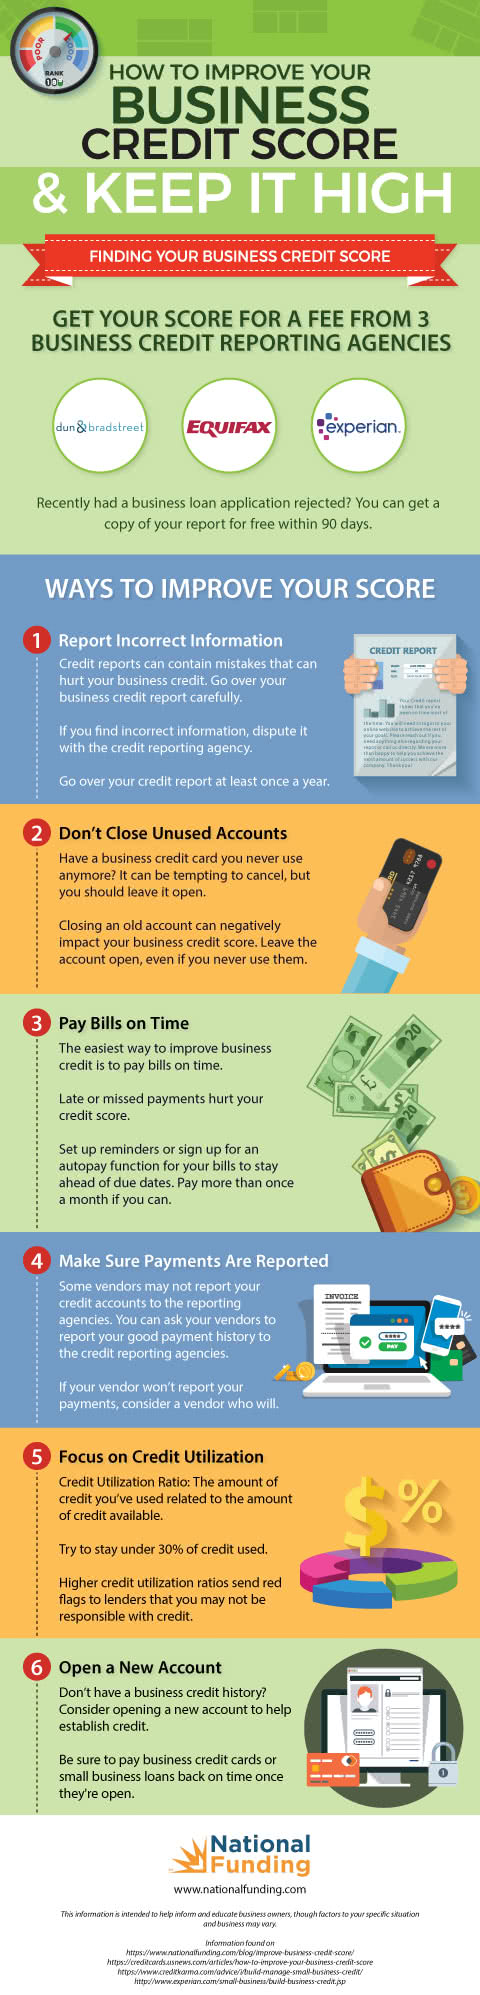 improve your business credit score infographic